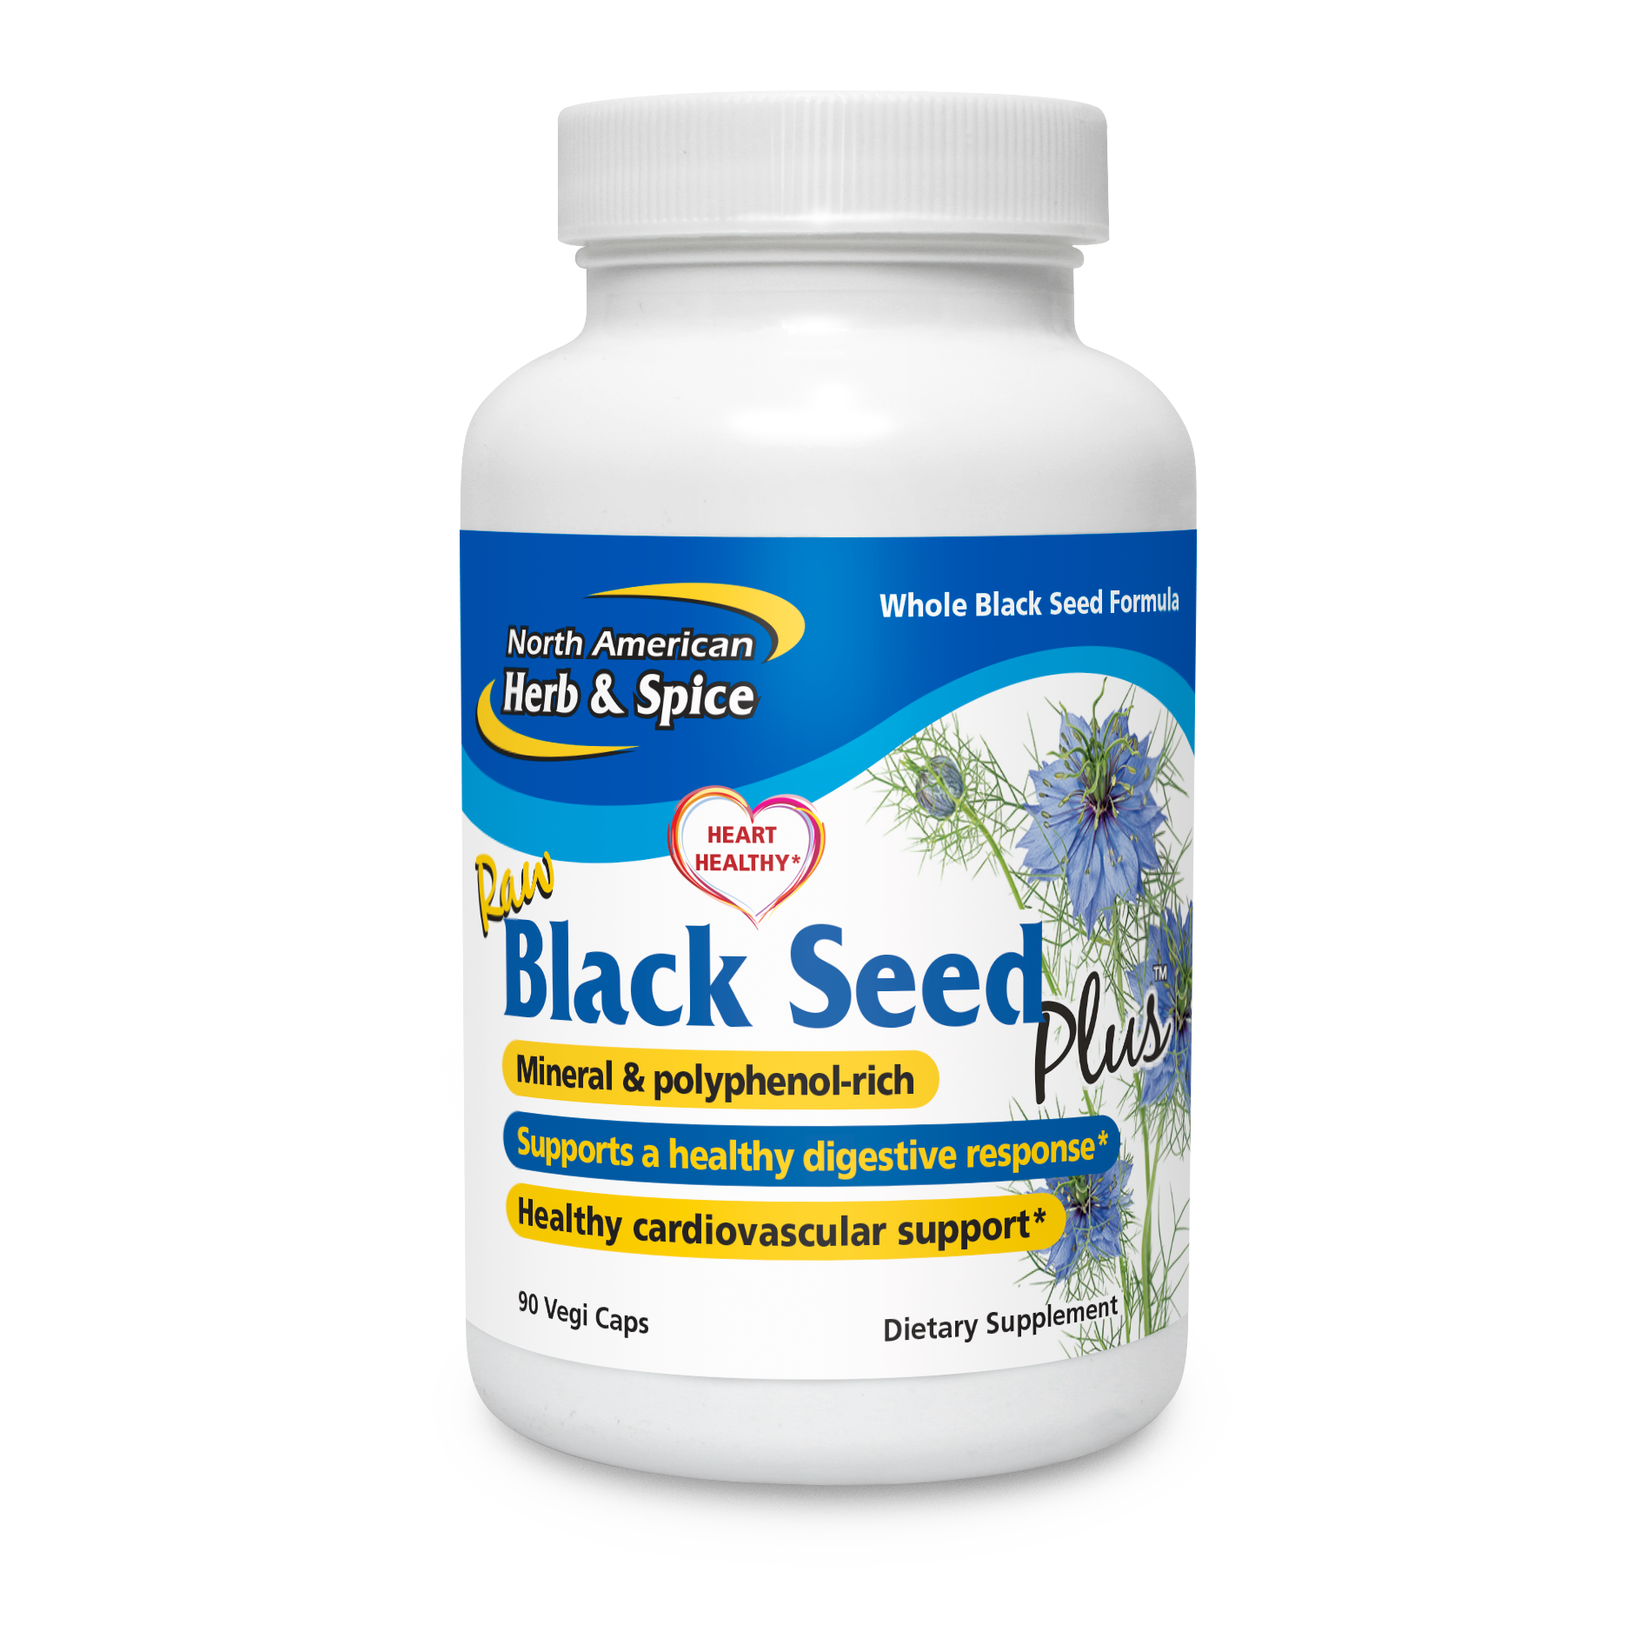 North American Herb & Spice Company Black Seed Plus 90ct